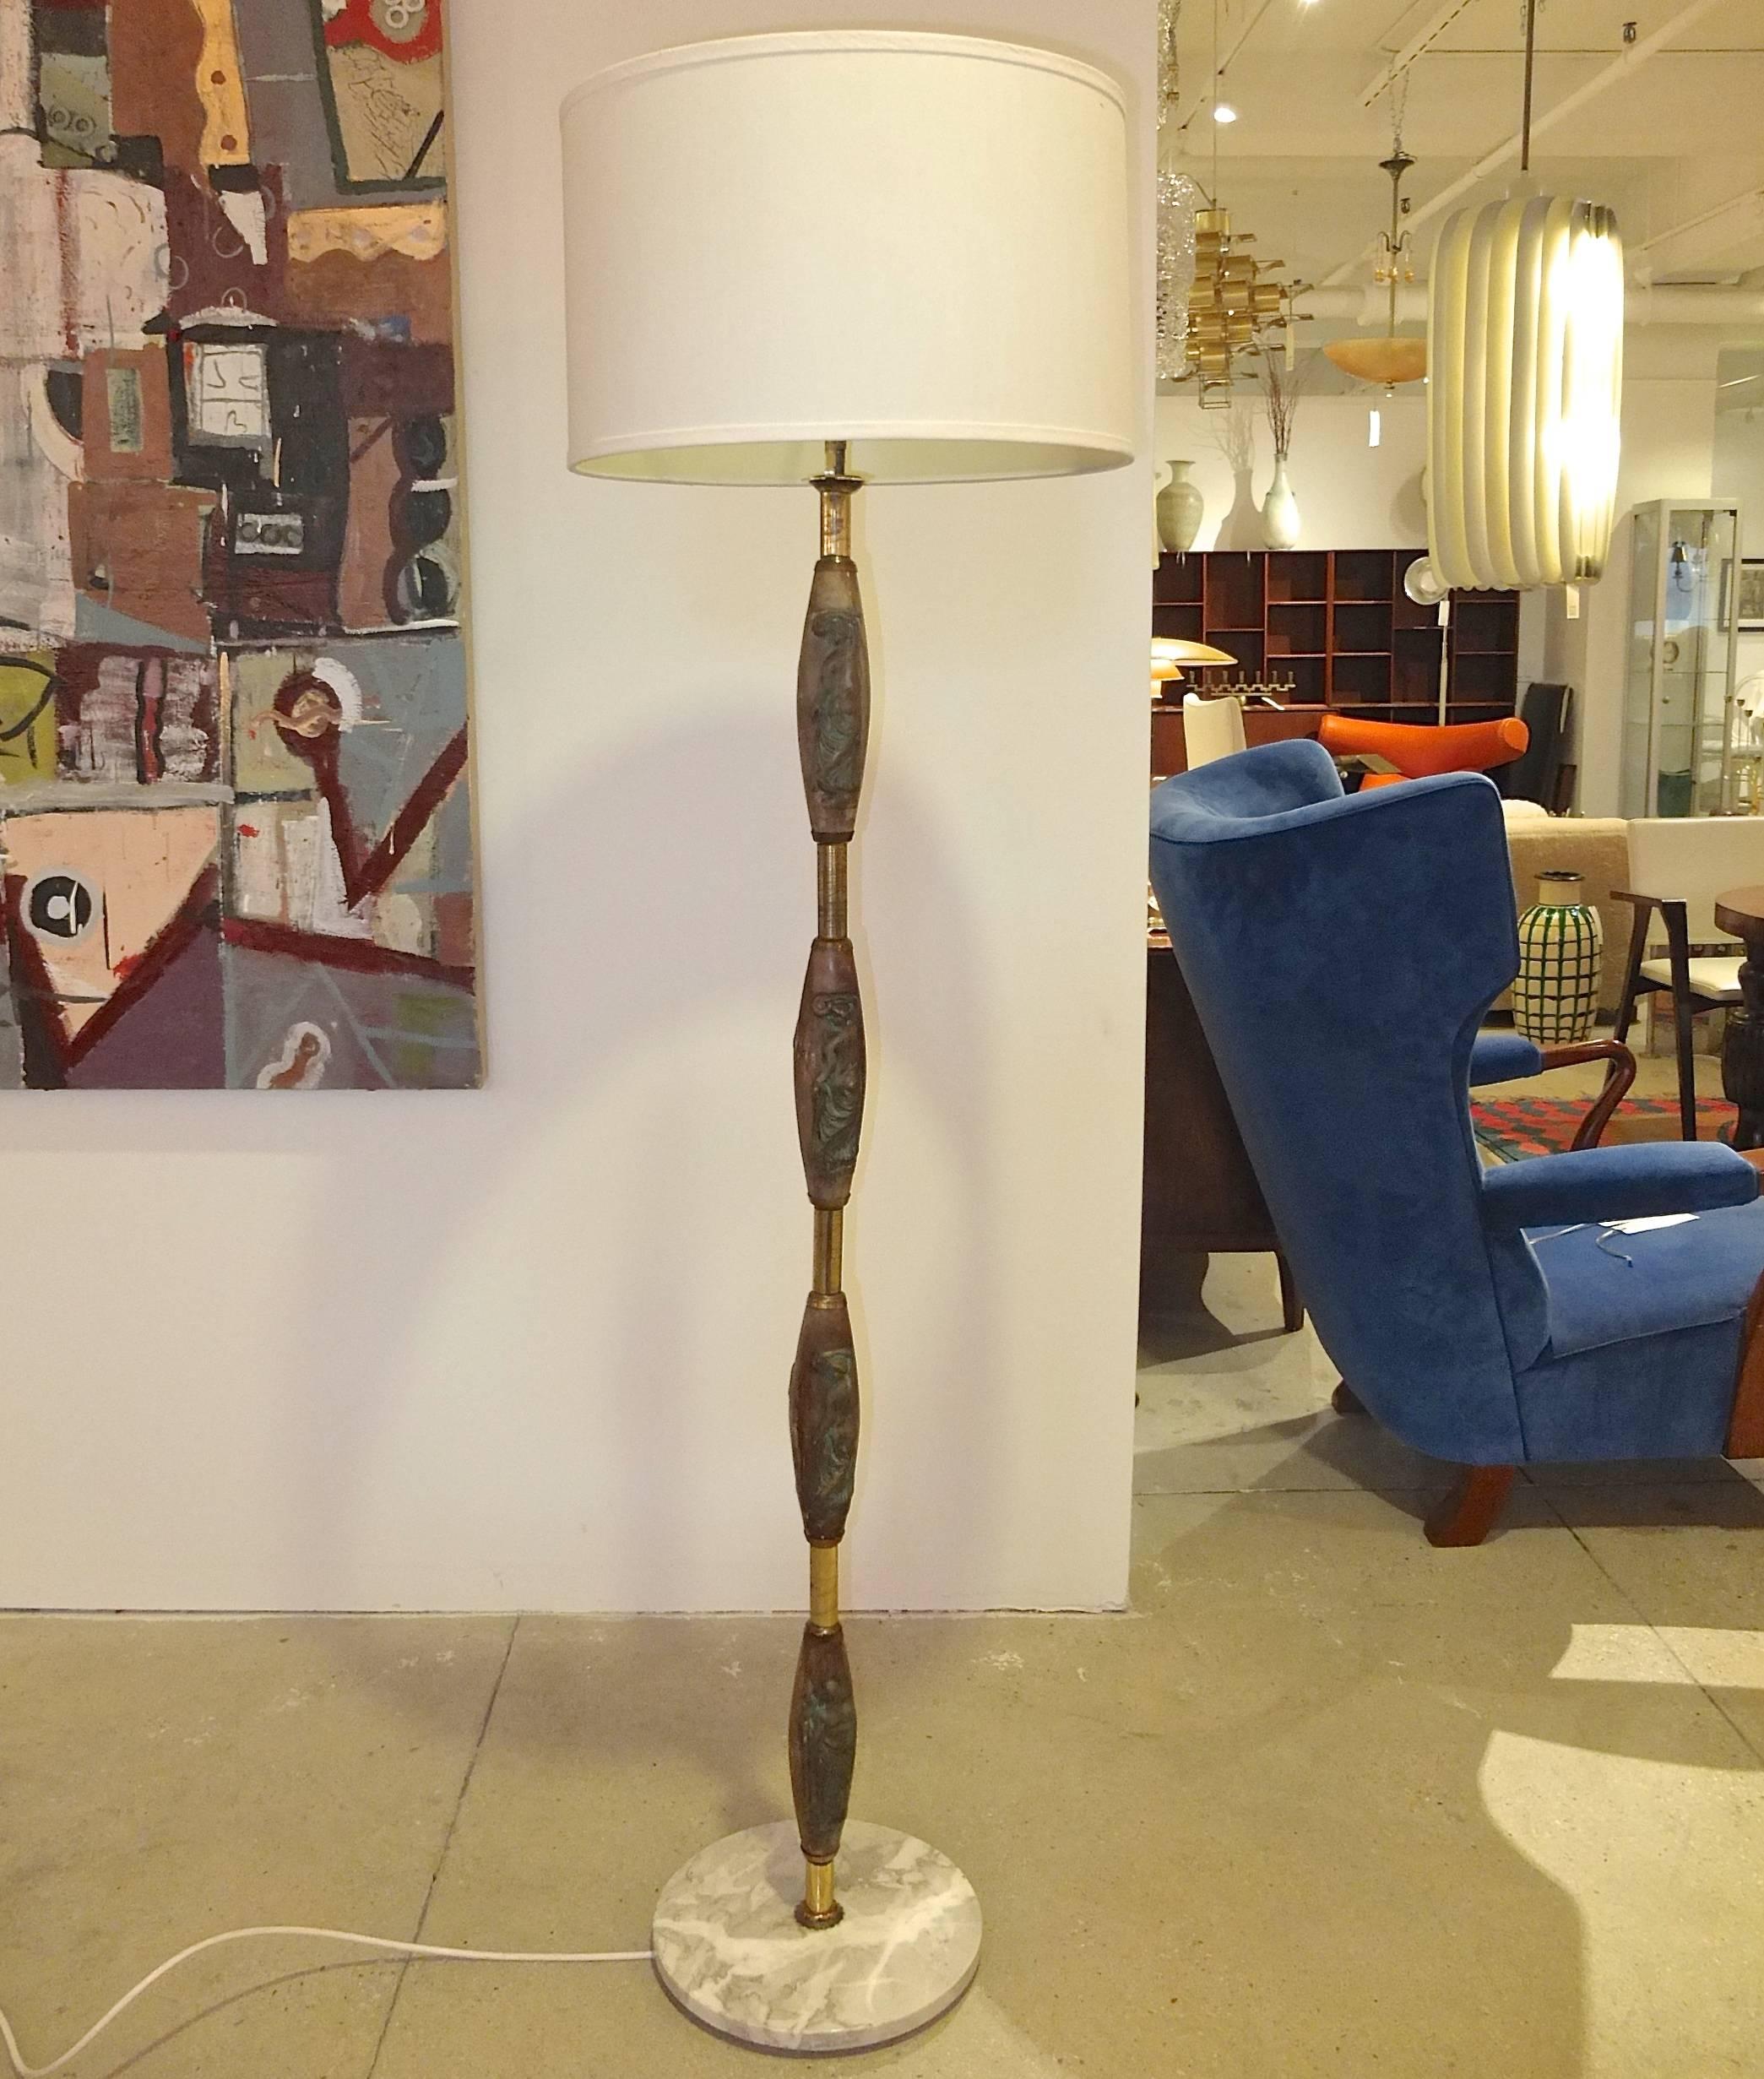 1940s, Italian, Art Deco floor lamp with bronze tone figural porcelain ornaments and brass fittings on a round marble base, available with original ornate shade (see last detail image). Measures: 69